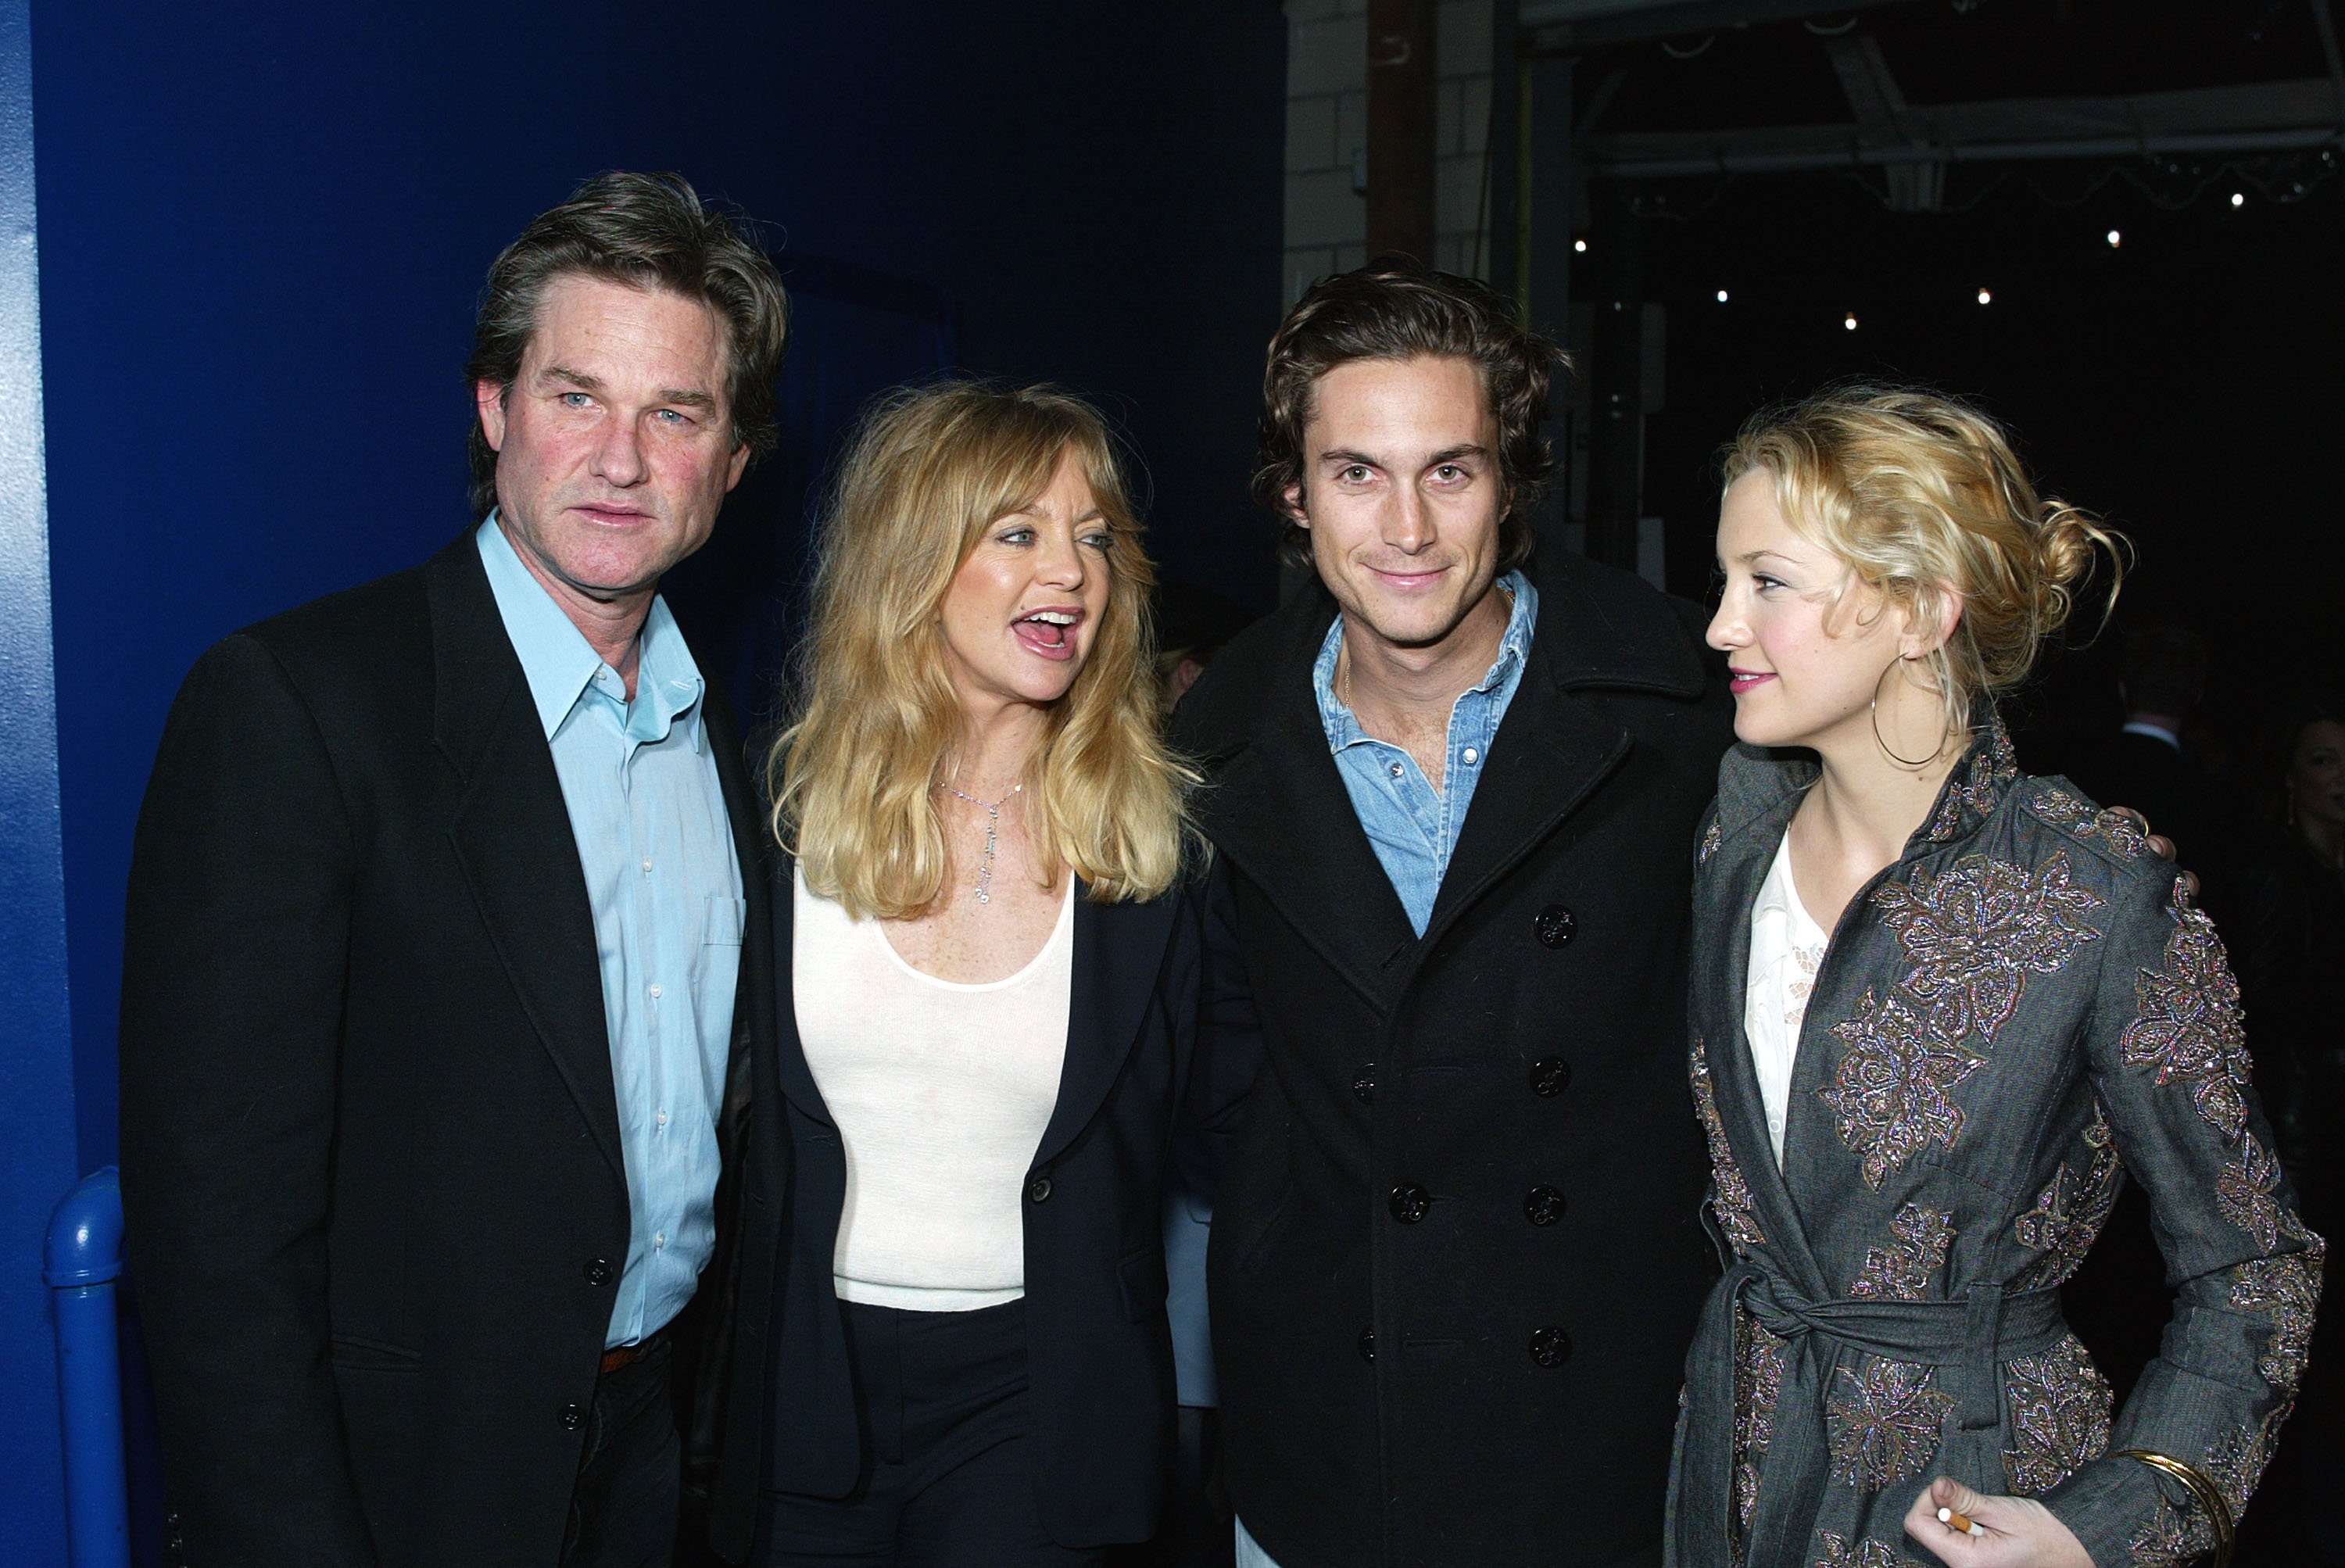 (L-R) Actors Kurt Russell, Goldie Hawn, Oliver Hudson and Kate Hudson pose at the post-premiere party for "Dark Blue" on February 12, 2003 in Los Angeles, California ┃Source: Getty Images